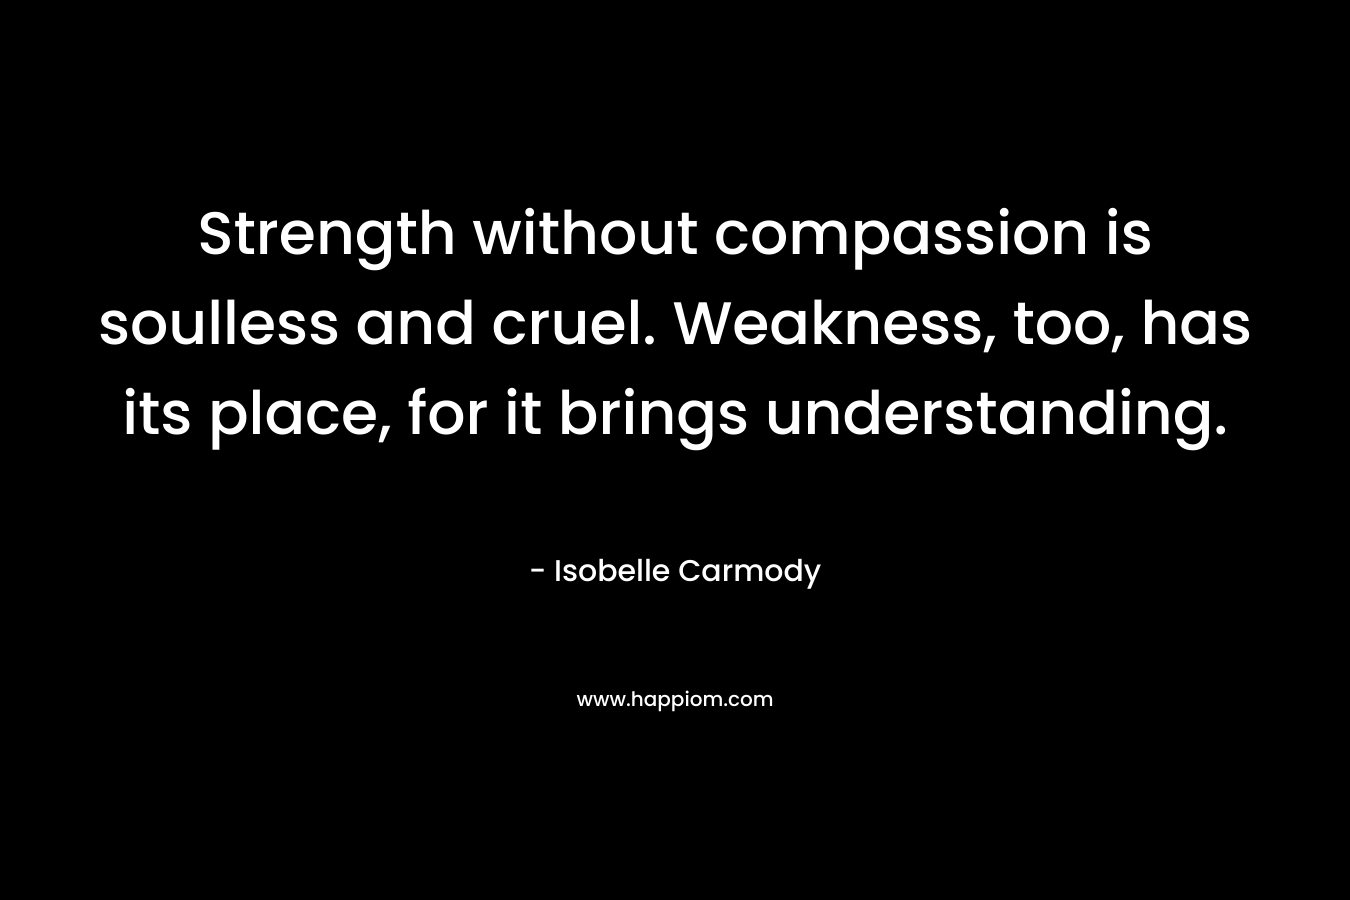 Strength without compassion is soulless and cruel. Weakness, too, has its place, for it brings understanding.